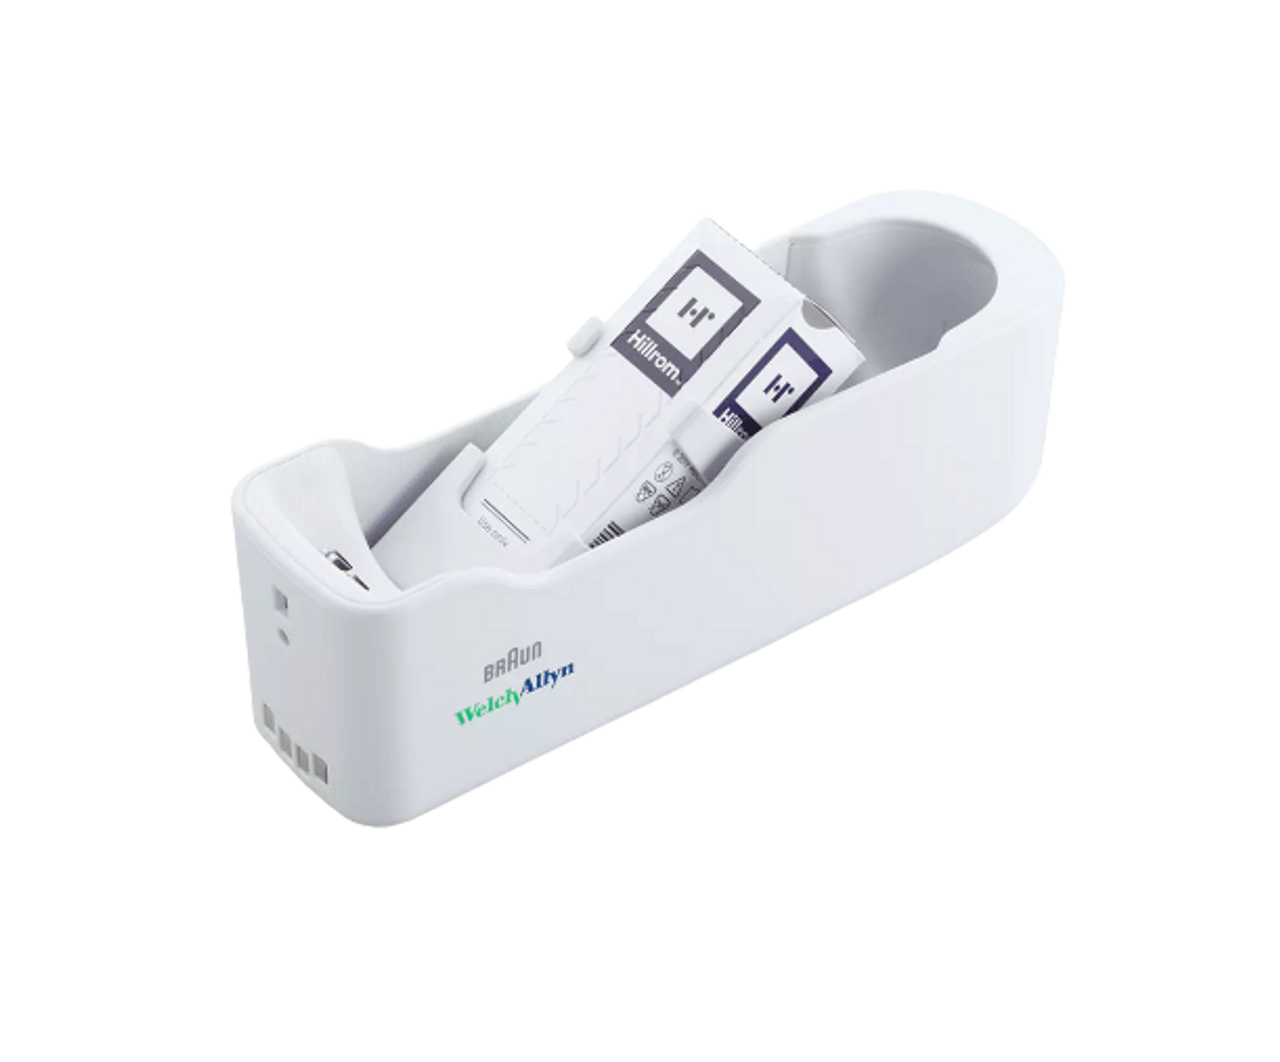 Welch Allyn Braun ThermoScan Pro 6000 Ear Thermometer - Jaken Medical Inc